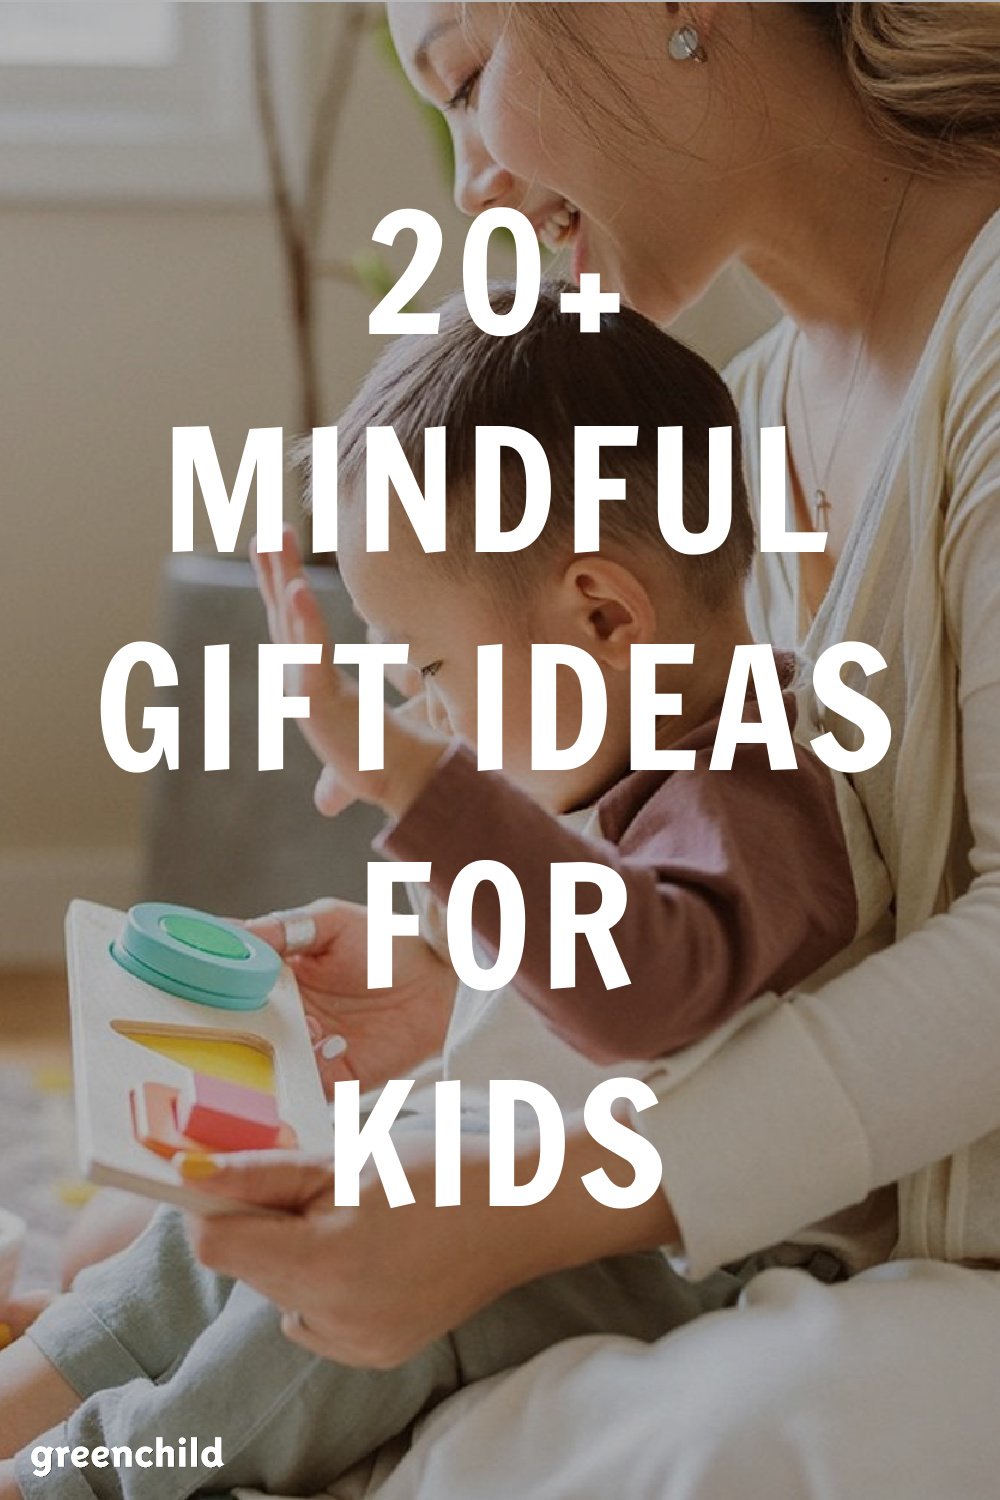 Mindfulness Toys for Kids - Babies, Toddlers, Big Kids, Teens